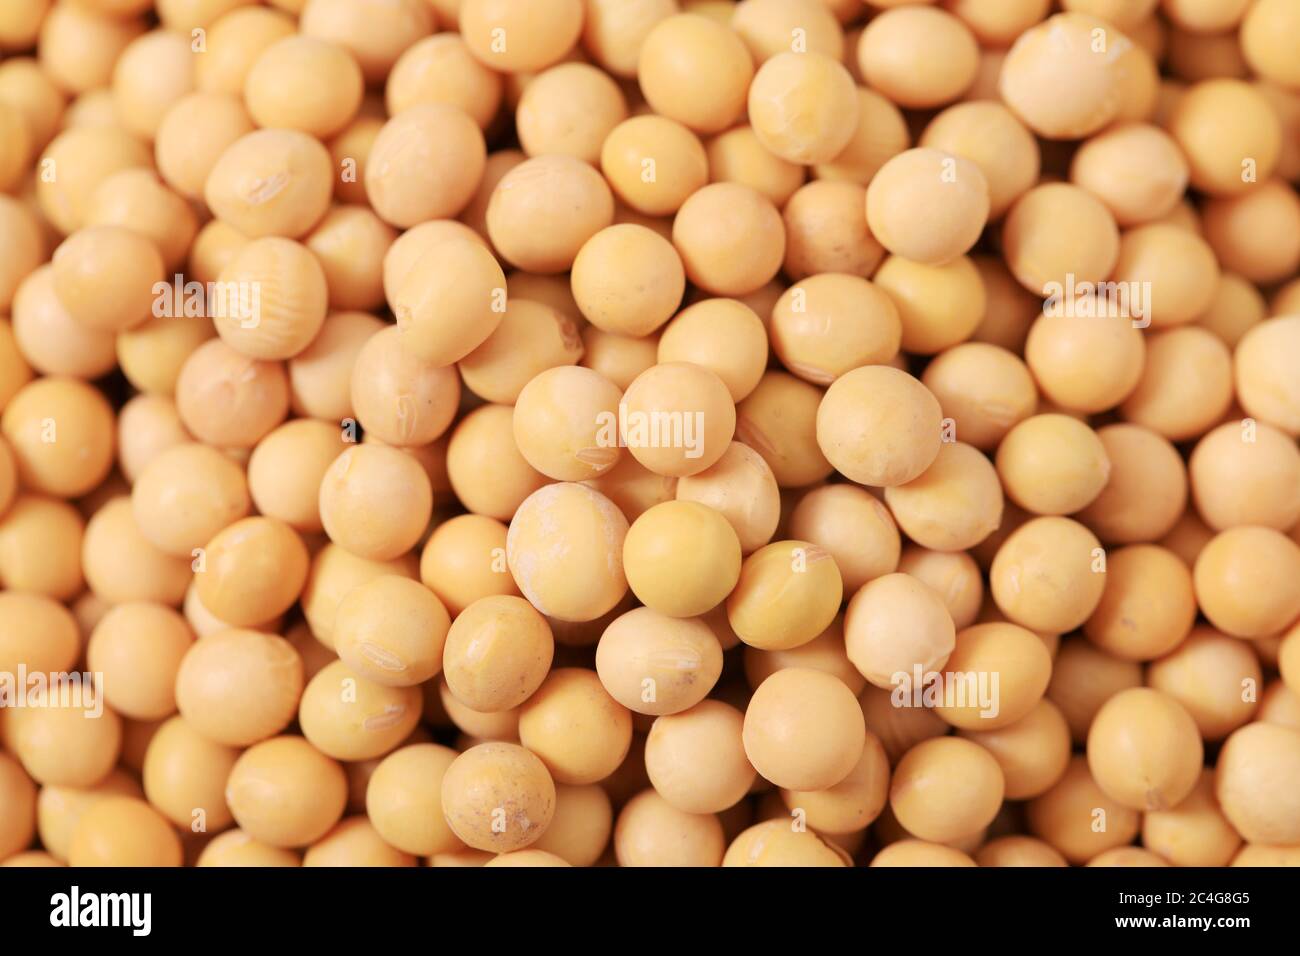 The soybean are on the wooden table Stock Photo